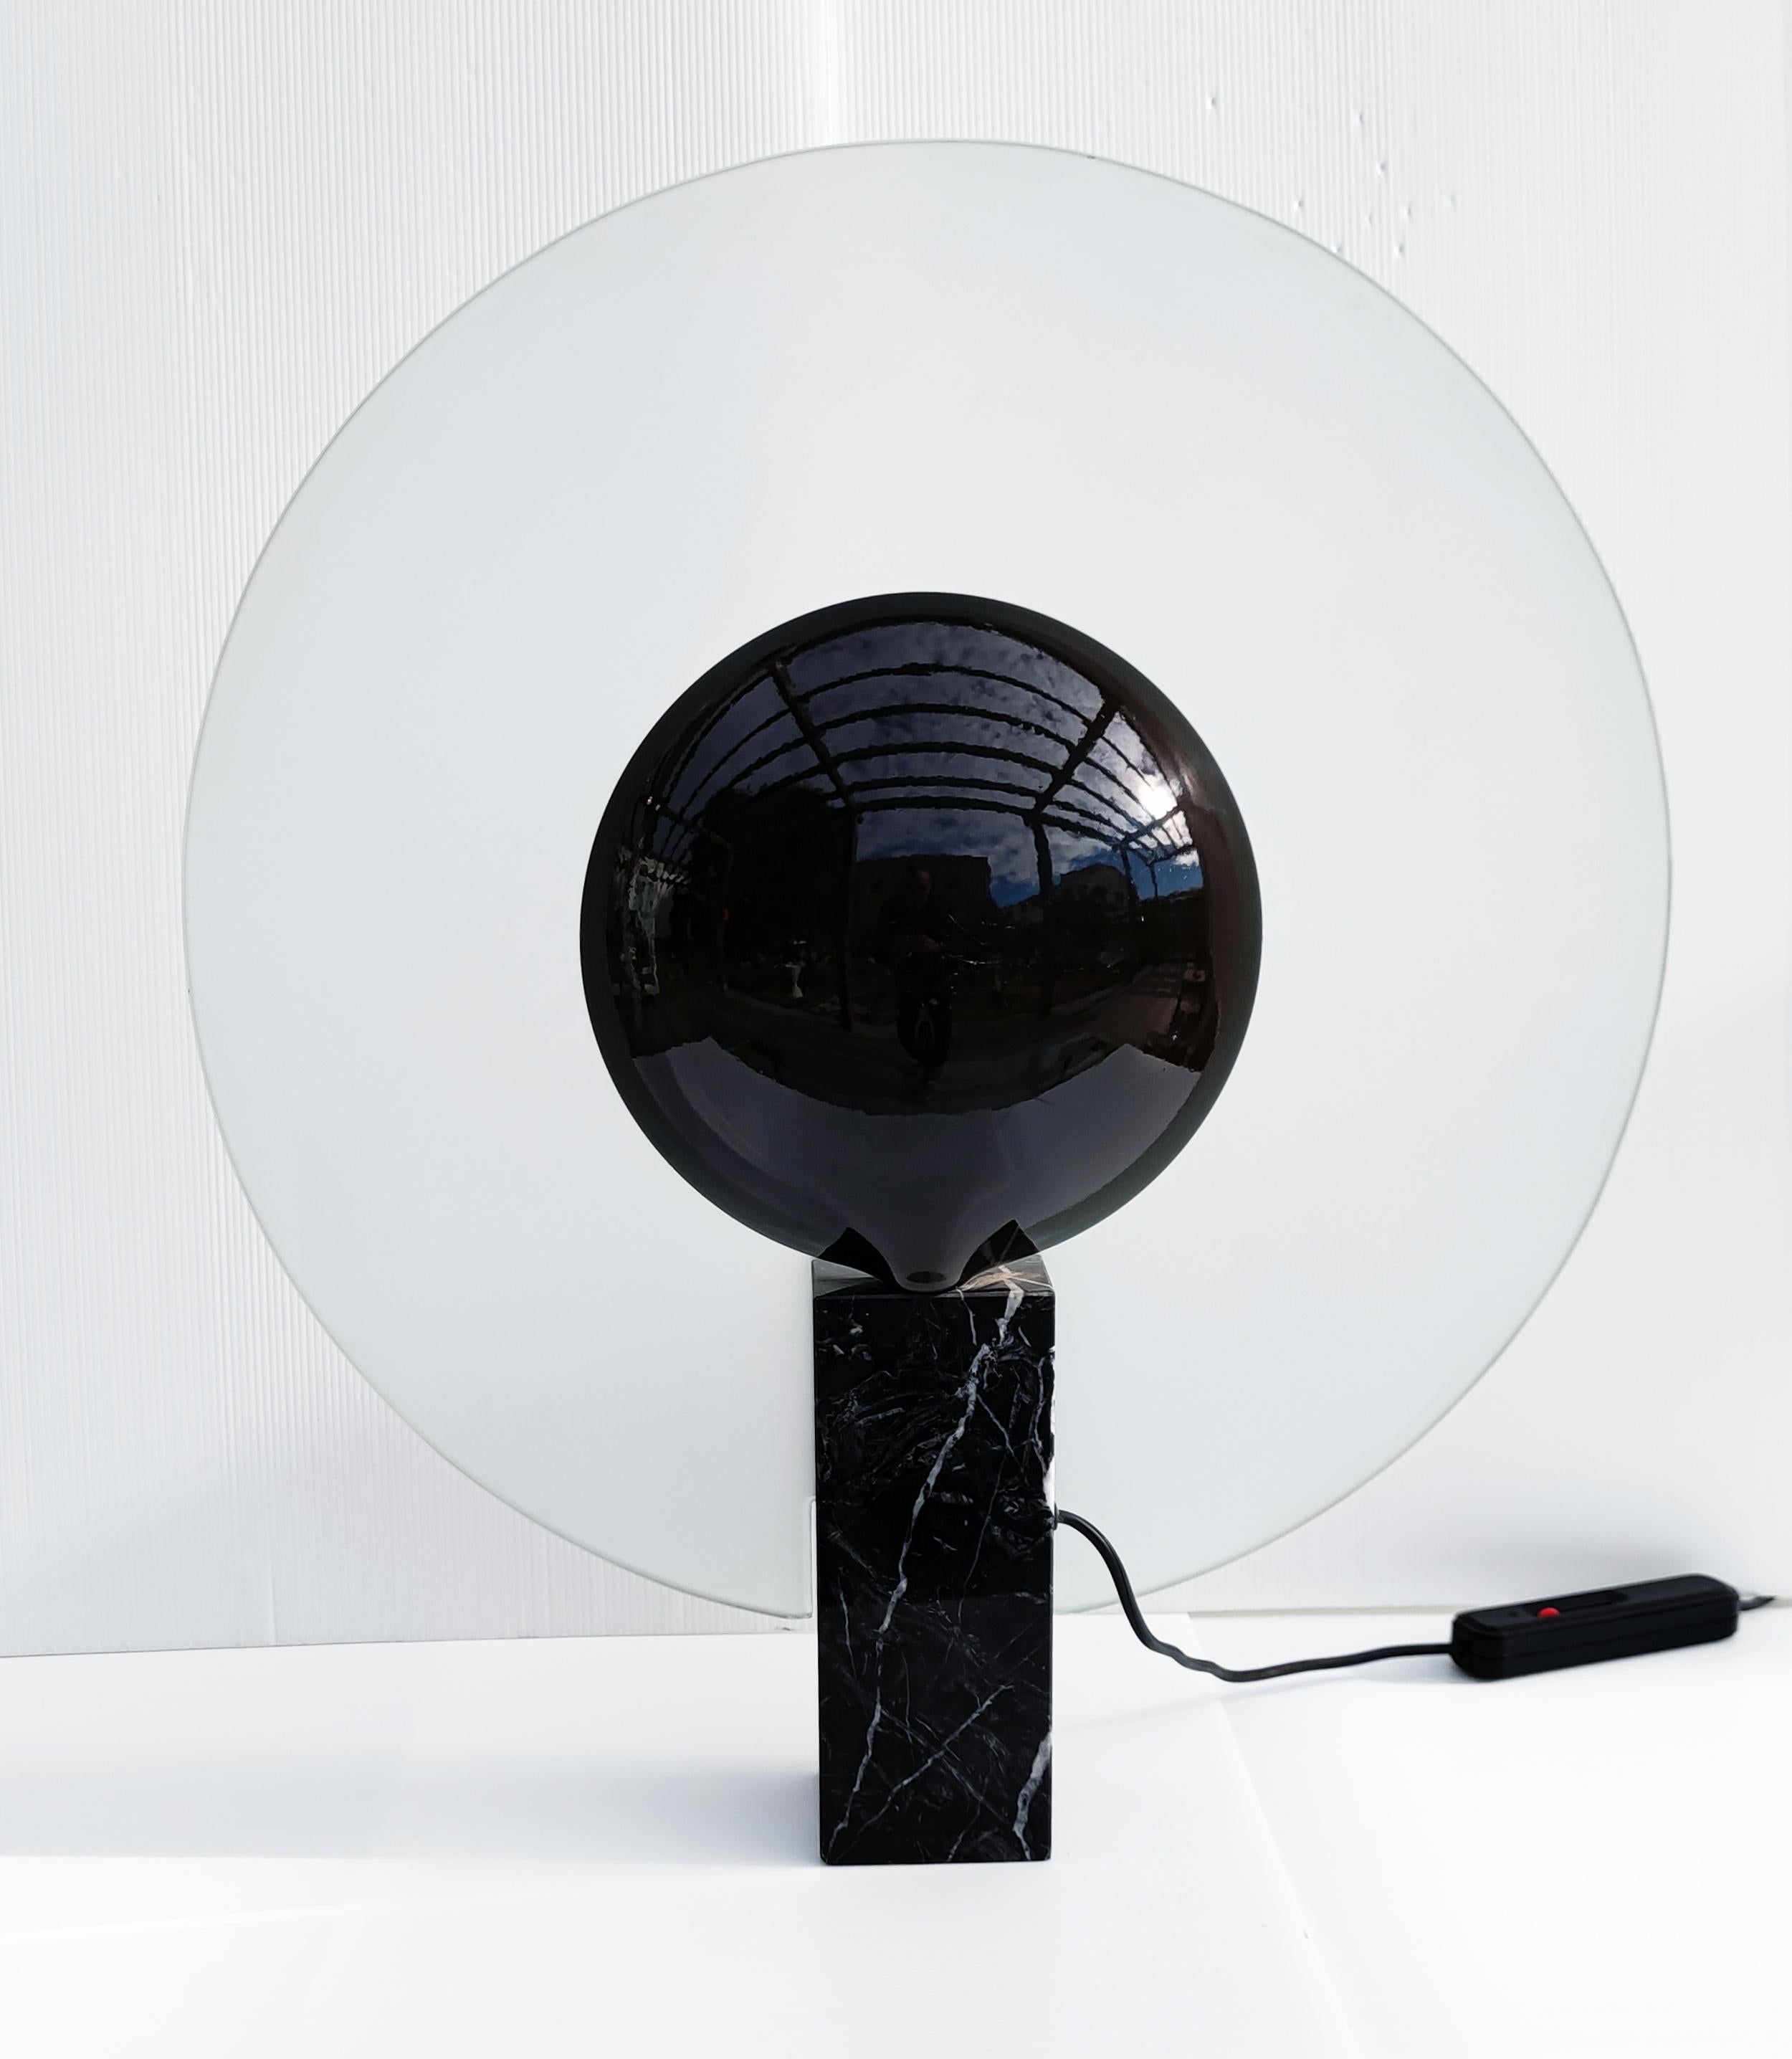 Rare and beautiful large Relco Milano marble table lamp manufactured in Italy in 1970s.
Formed of a large polished glass disc mounted on an elegant carare marble base and equipped with a dimmer switch for different lighting ambience.